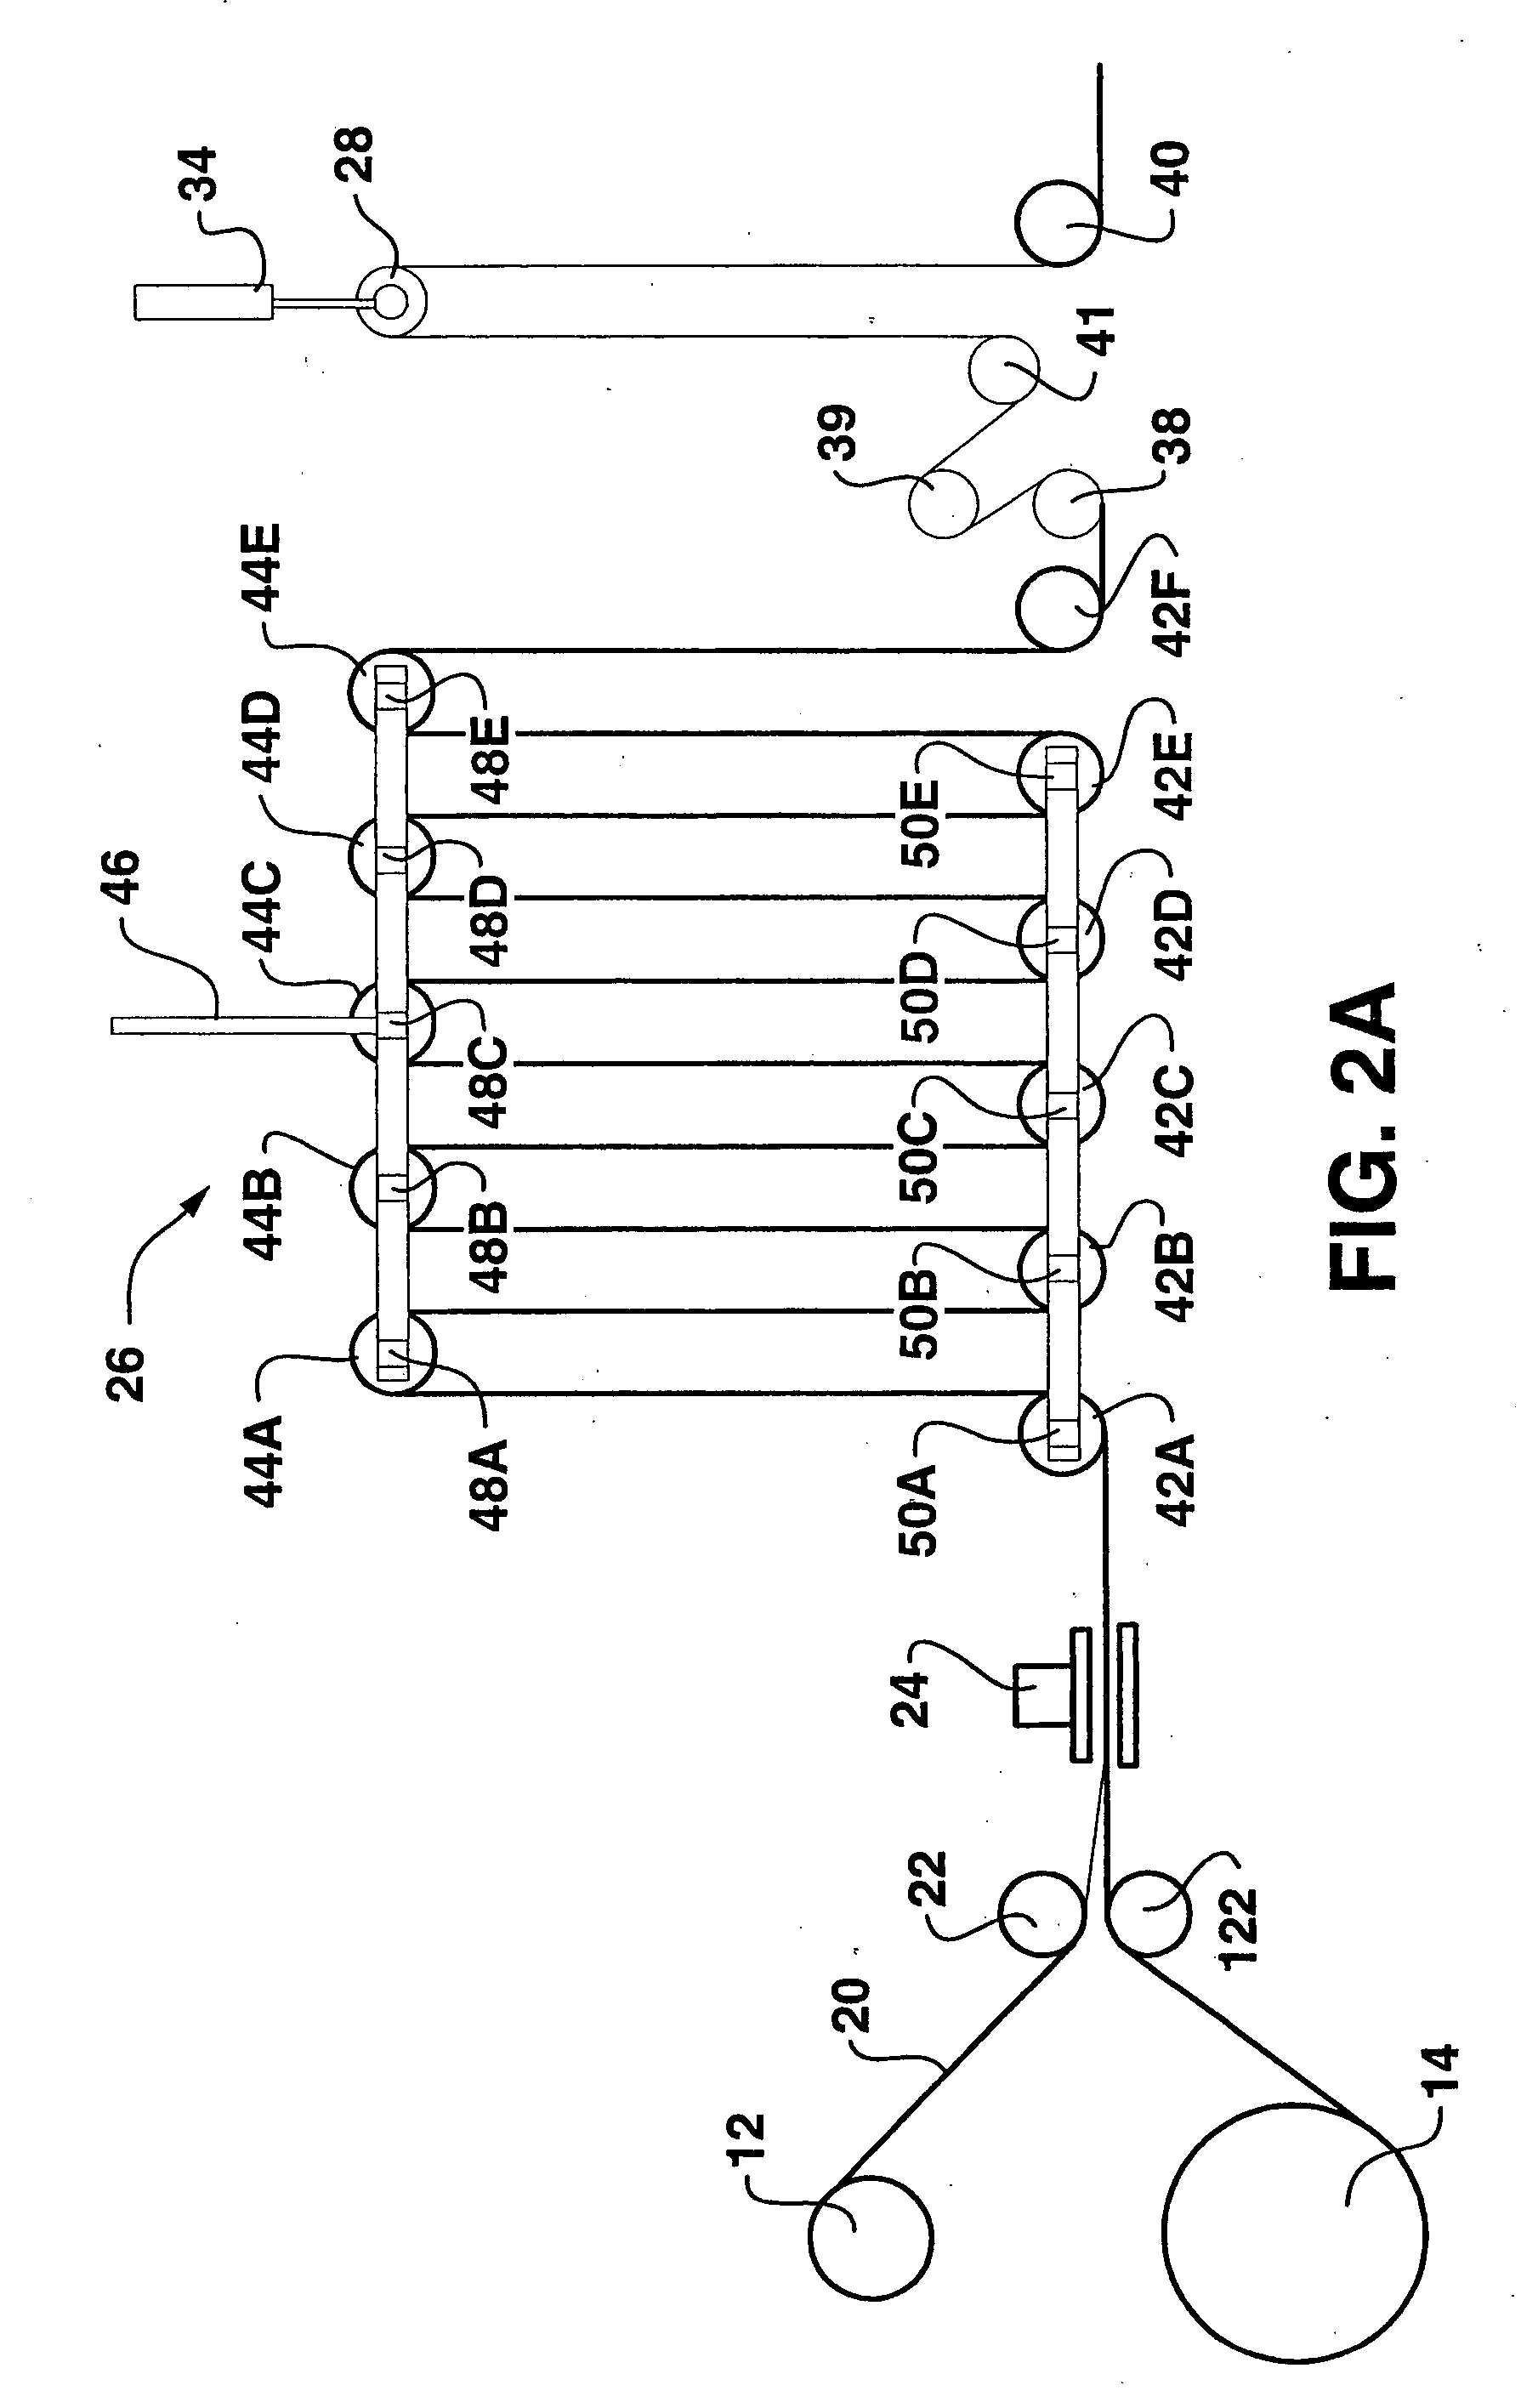 System and process for controlling the deceleration and acceleration rates of a sheet material in forming absorbent articles